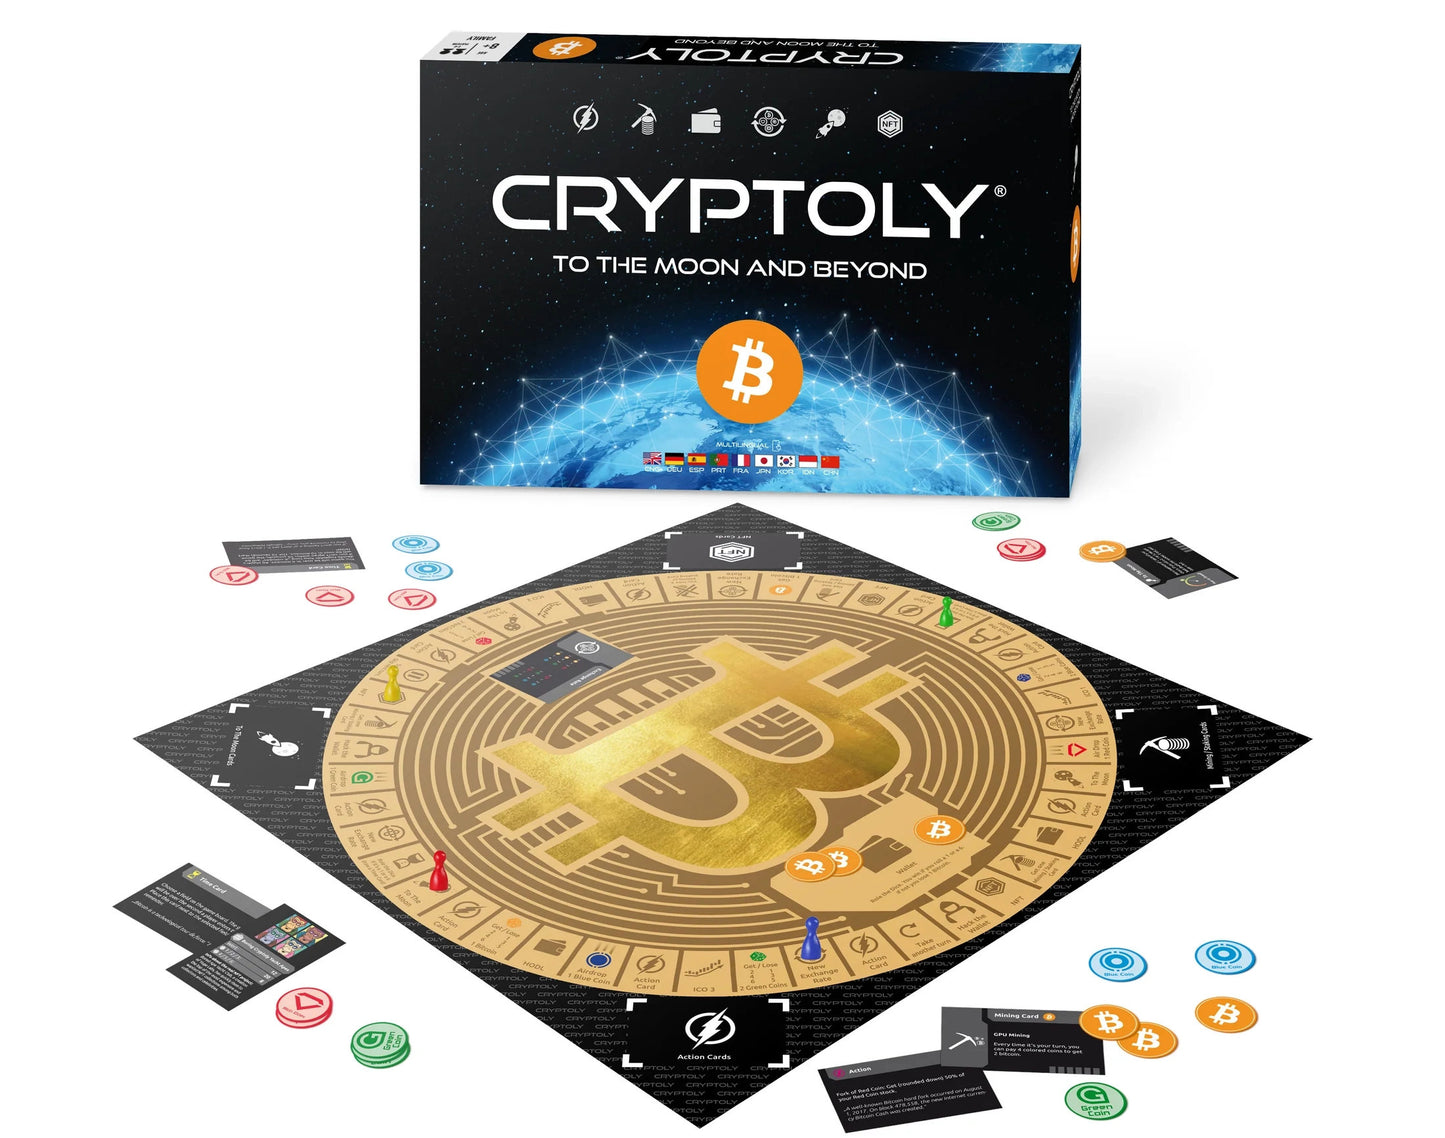 CRYPTOLY – The strategy game for everyone! English language version